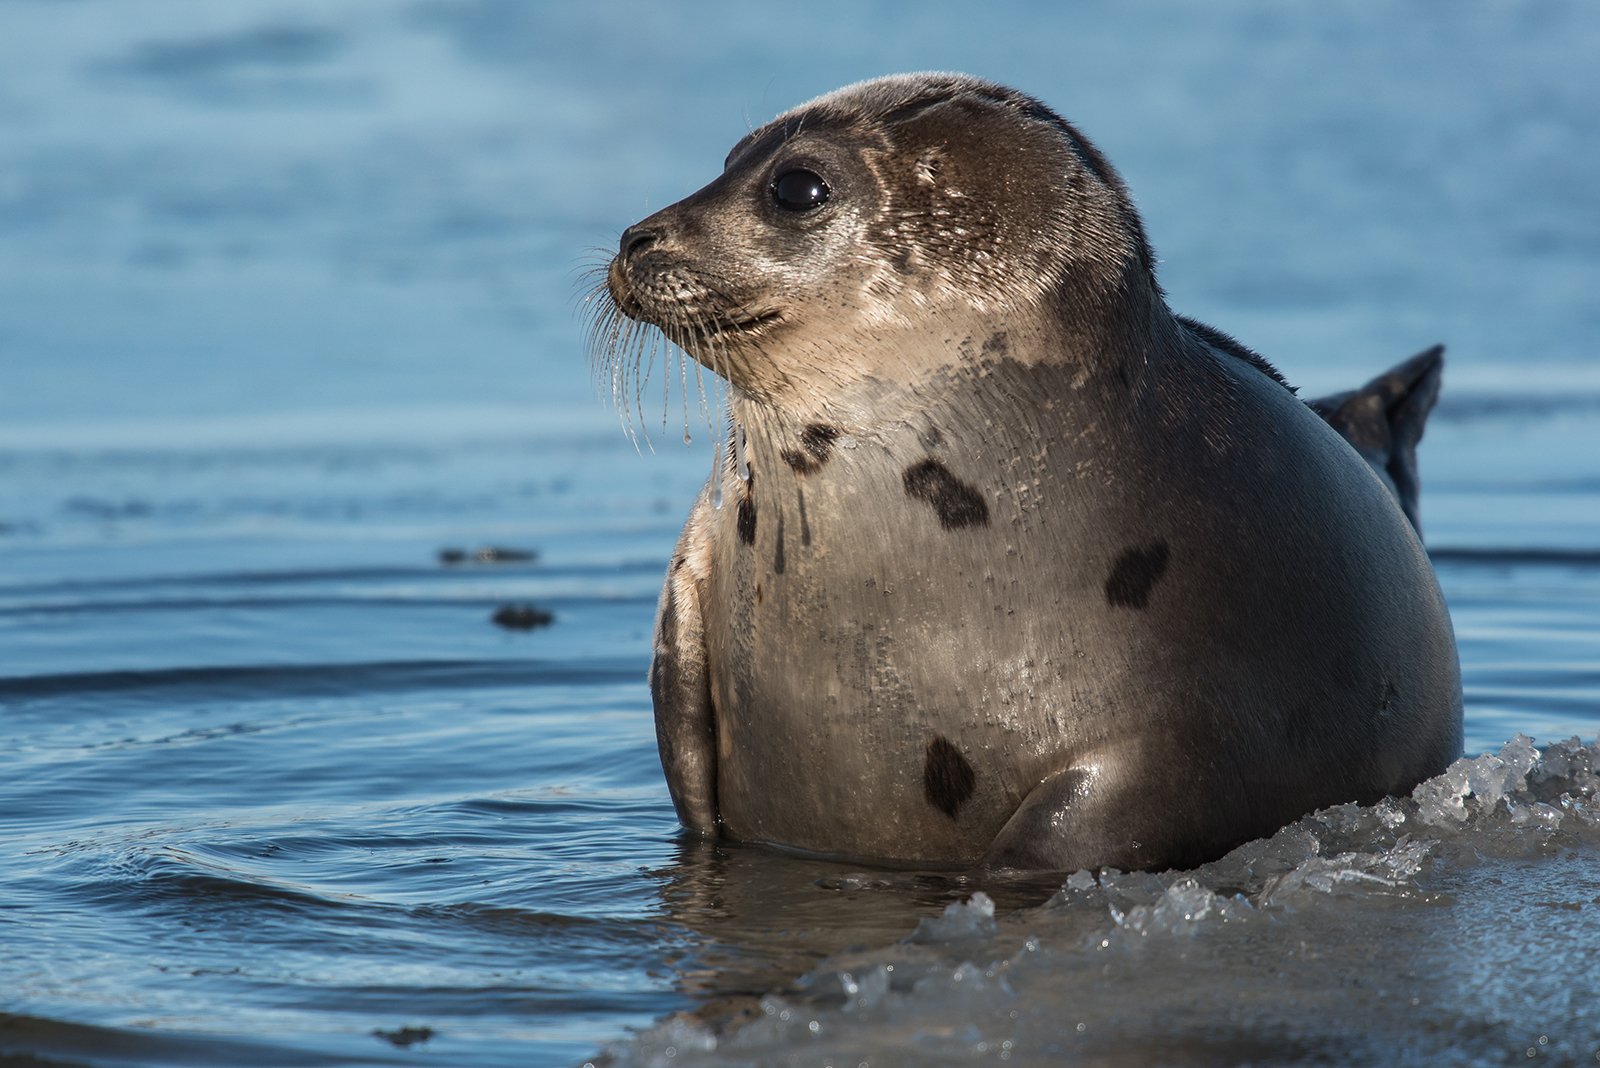 Wildlife Guide: Harp Seal Facts